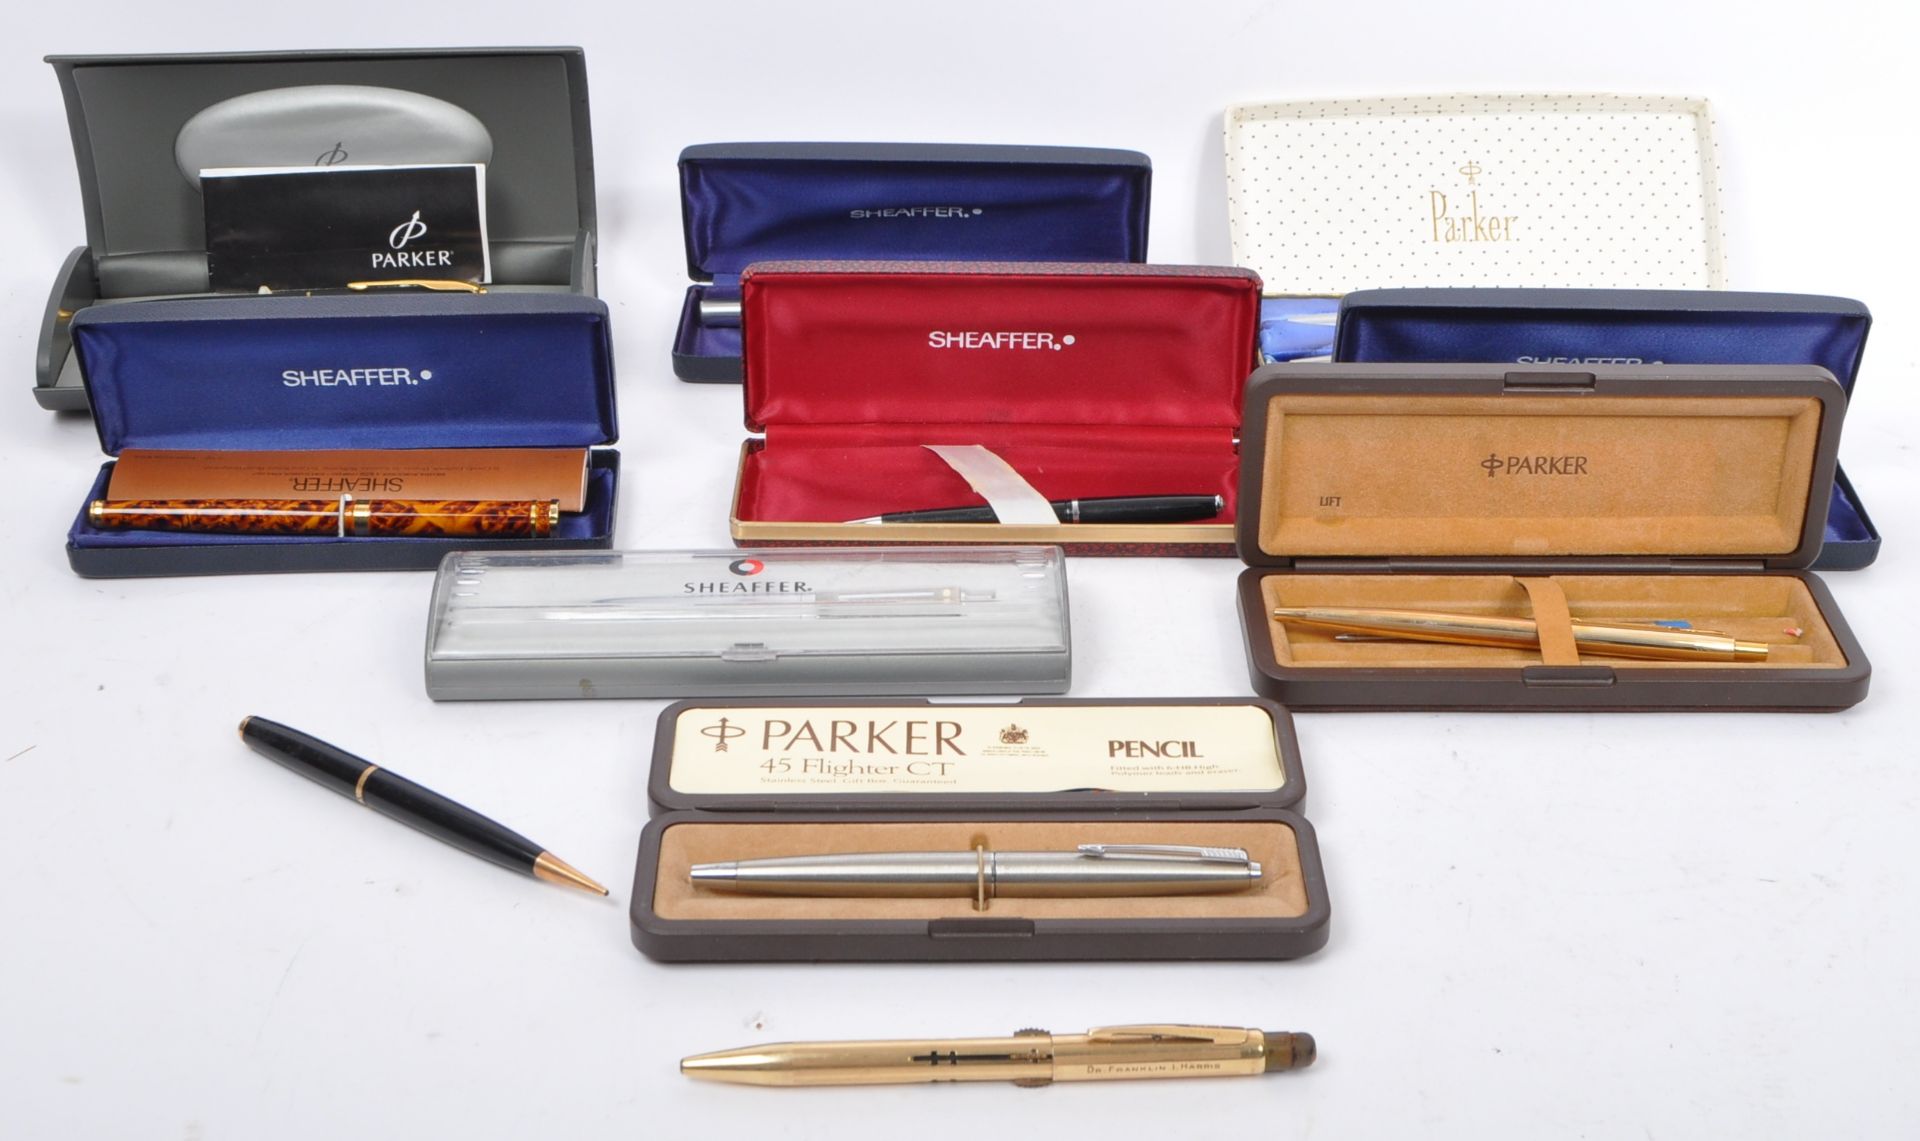 LARGE ASSORTMENT OF 20TH CENTURY BALL POINT PENS